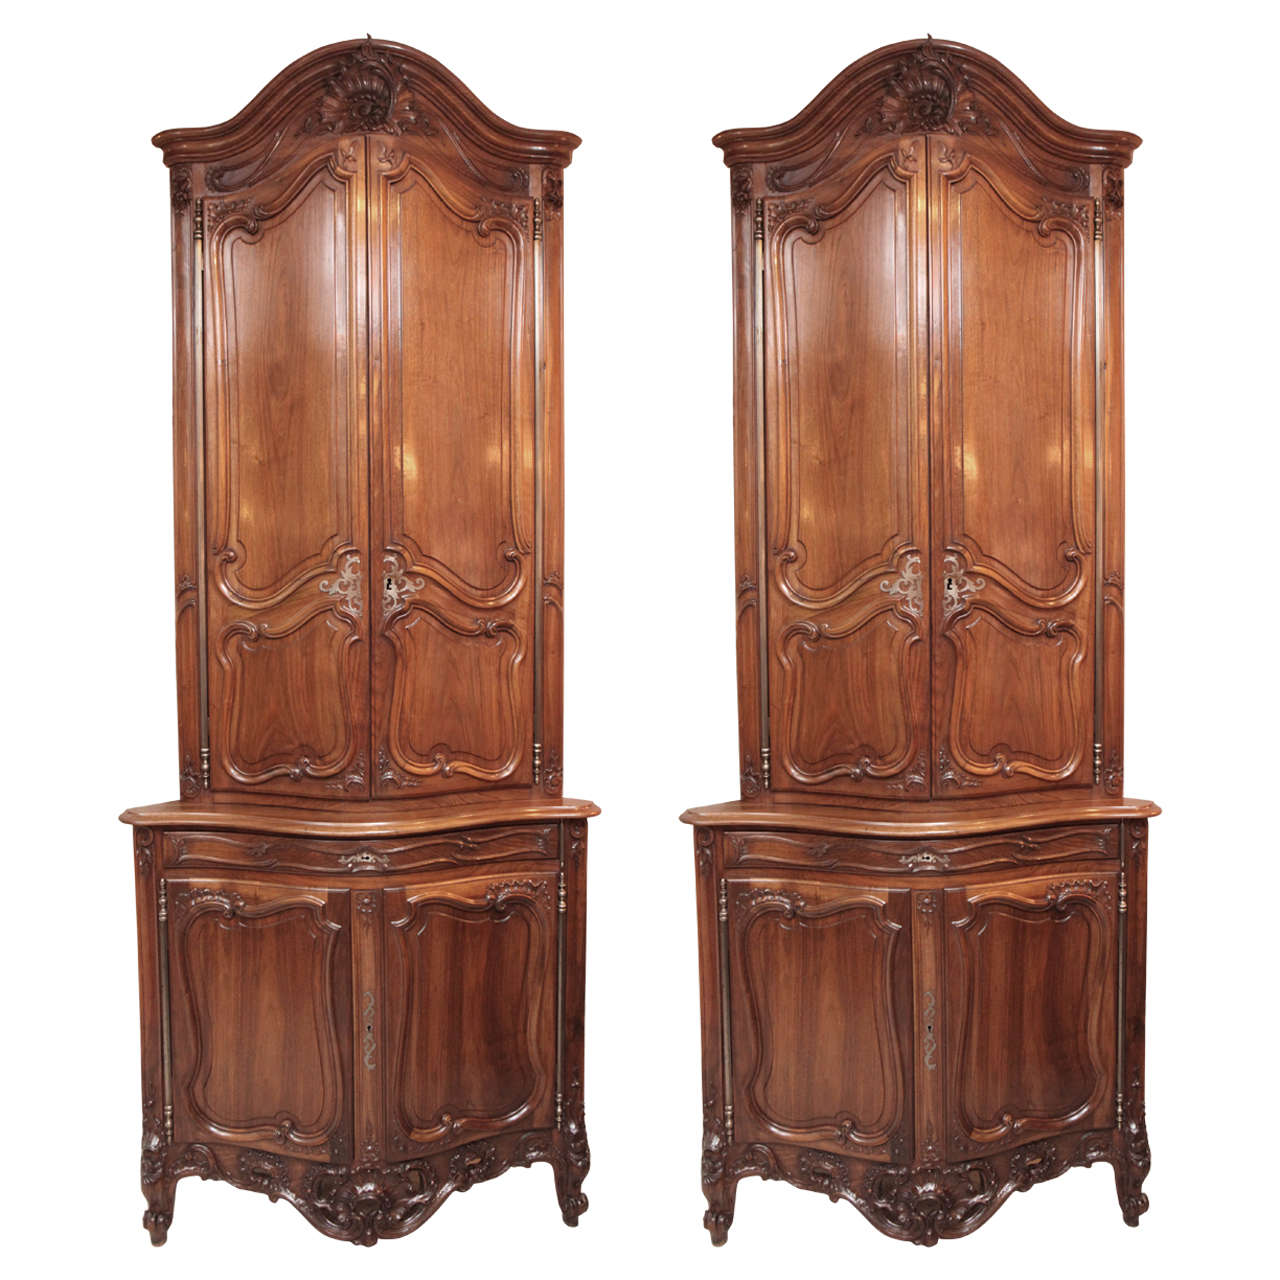 Pair of 19th Century French Walnut Carved Corner Cabinets